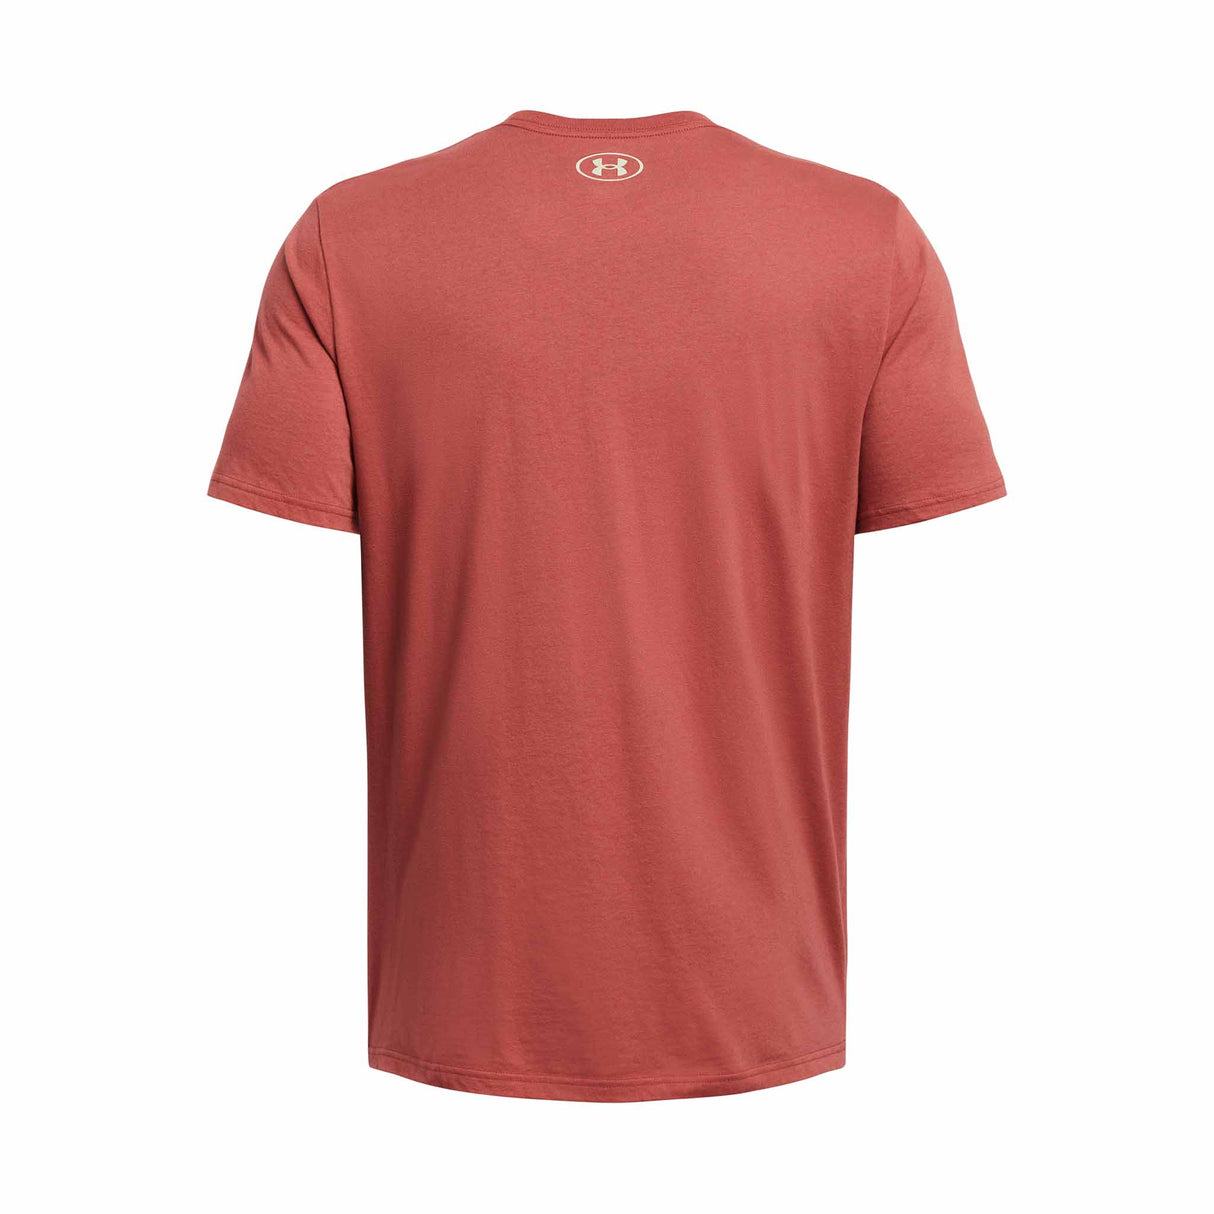 Under Armour GL Foundation Update t-shirt homme dos - Sedona Red / Silt